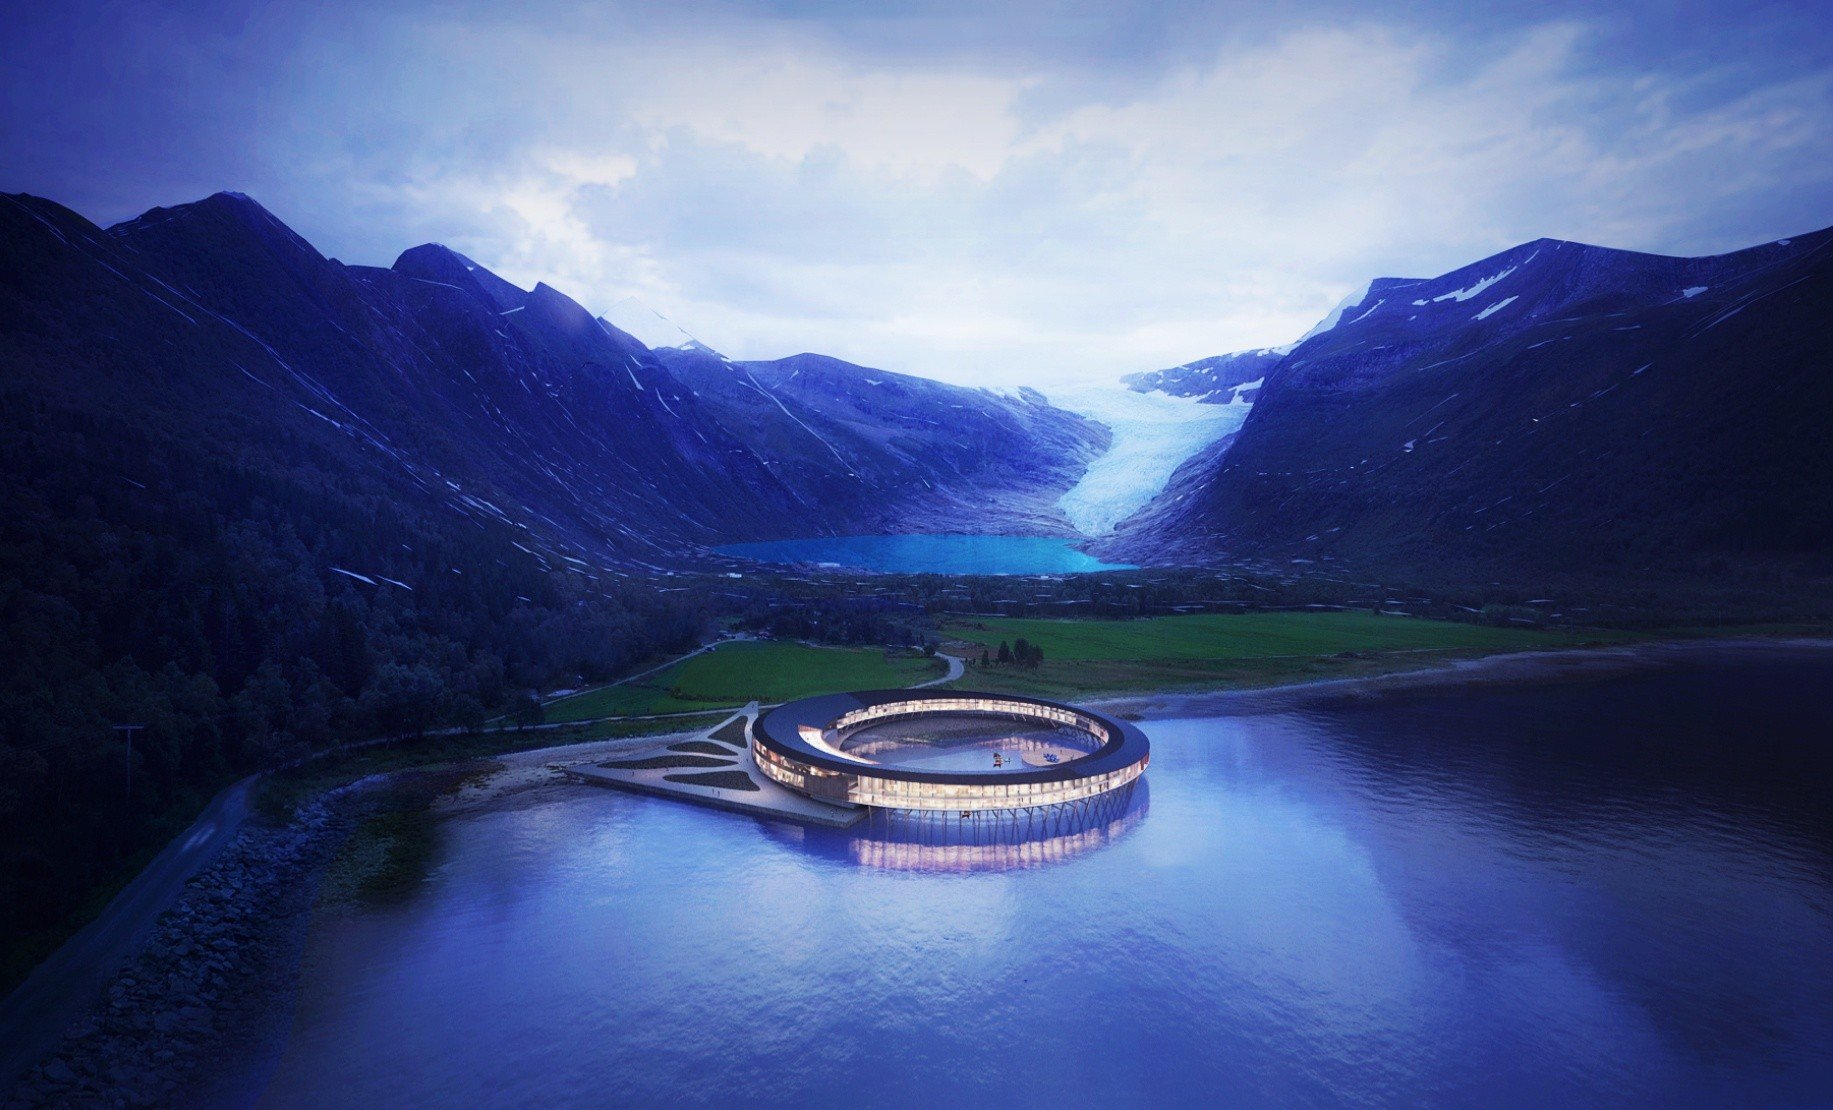 The stunning ring-shaped hotel, Svart, which is situated on Norway’s Svartisen glacier, just above the Arctic Circle, will be the world’s first energy positive hotel when it opens in 2021.